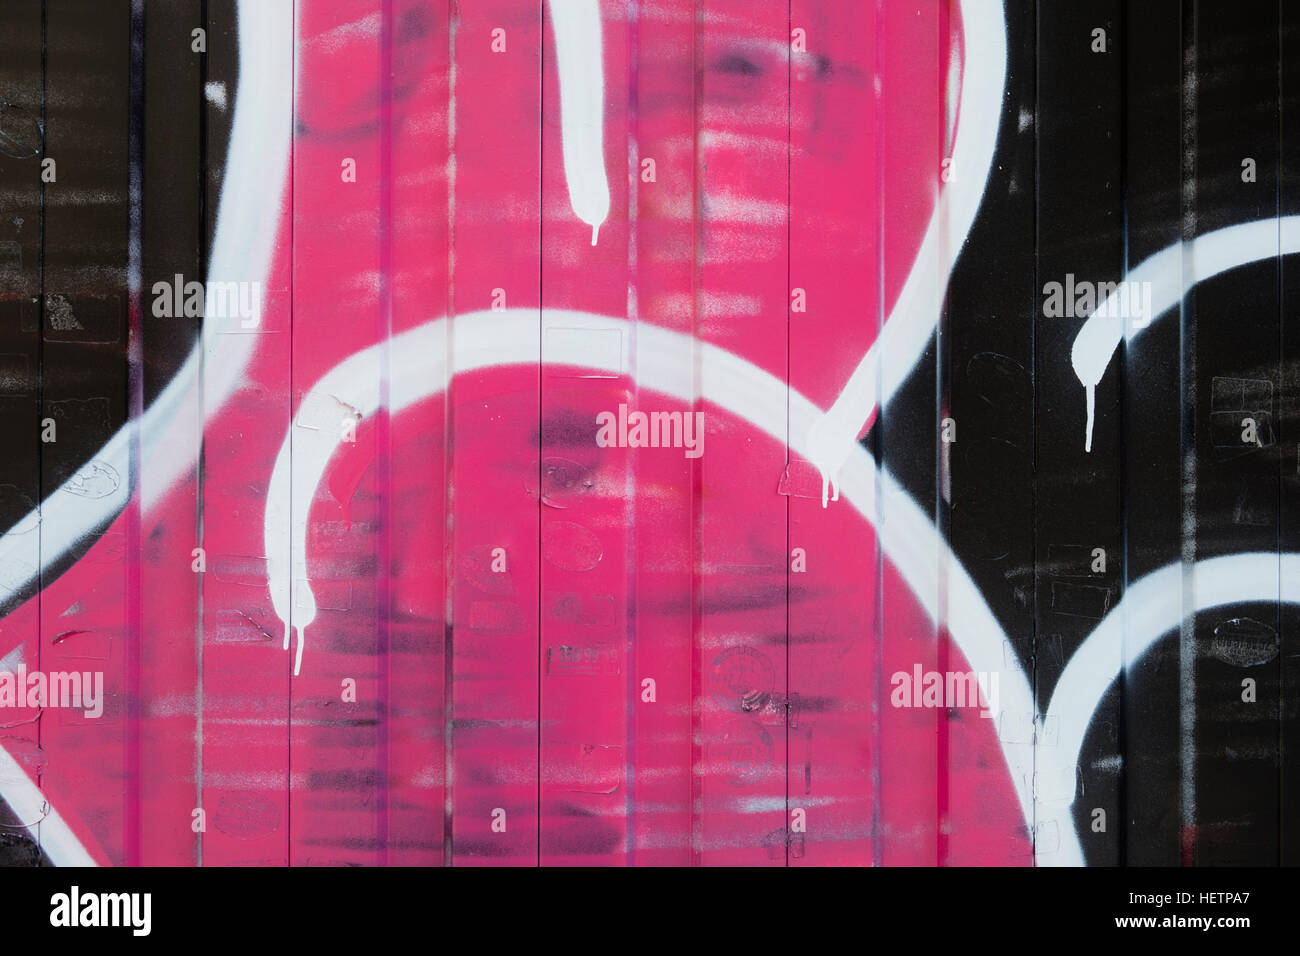 Detail of painted wall with so called 'graffiti', in pink, white and black. Stock Photo